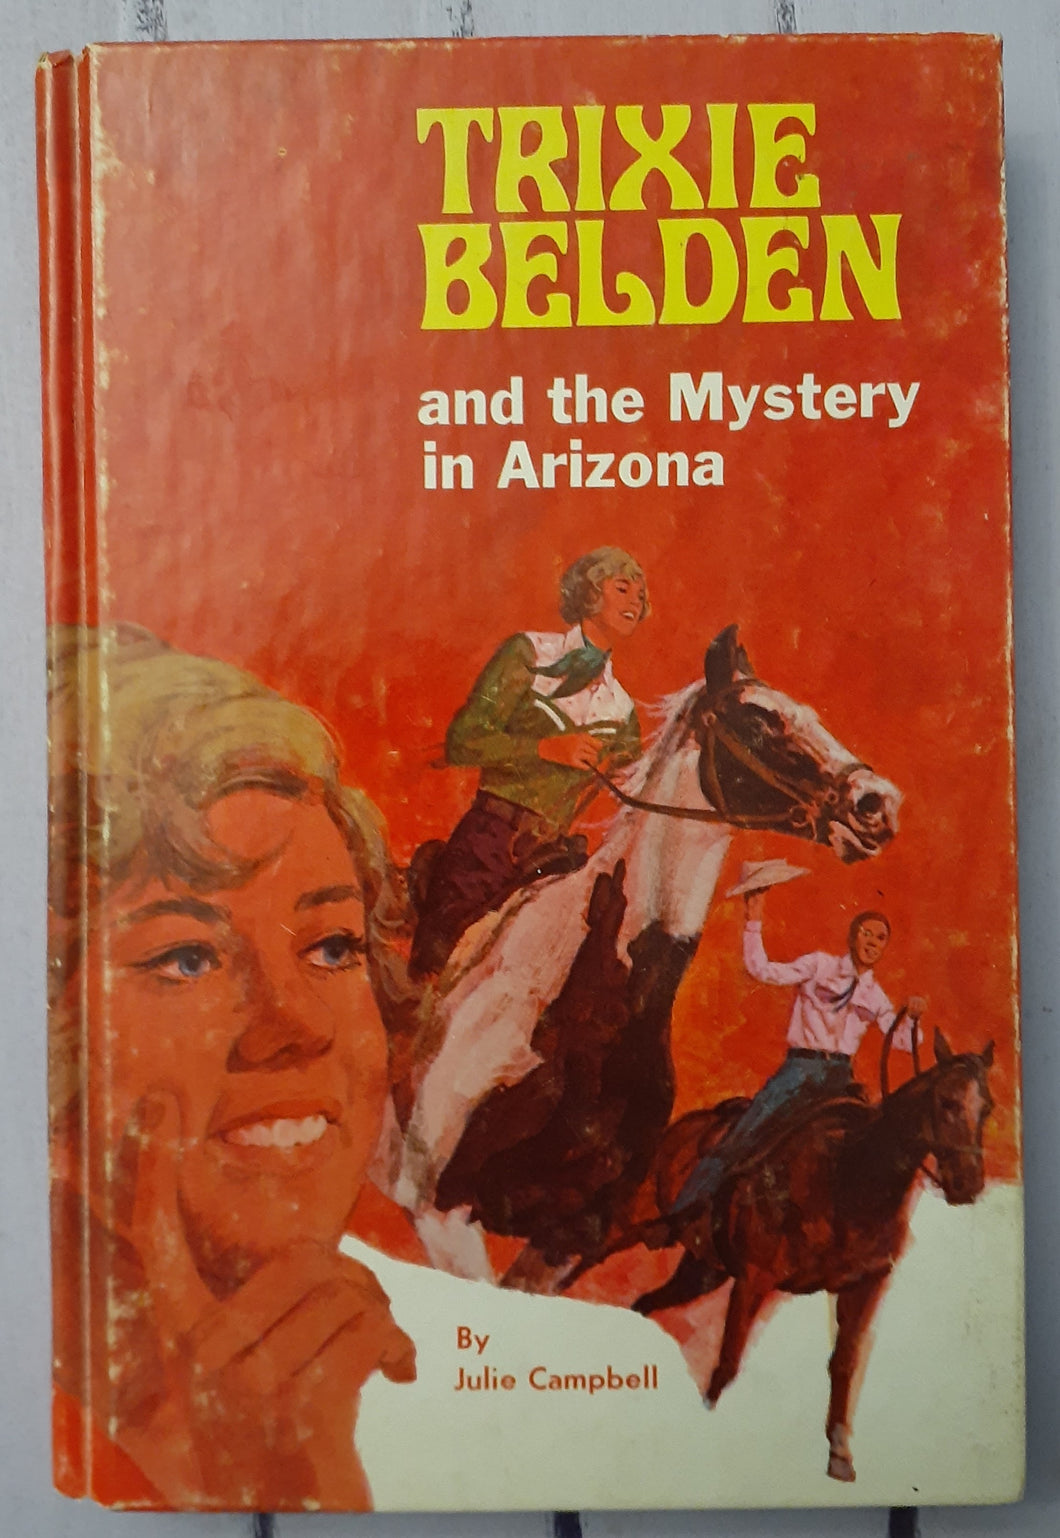 Trixie Belden and the Mystery in Arizona